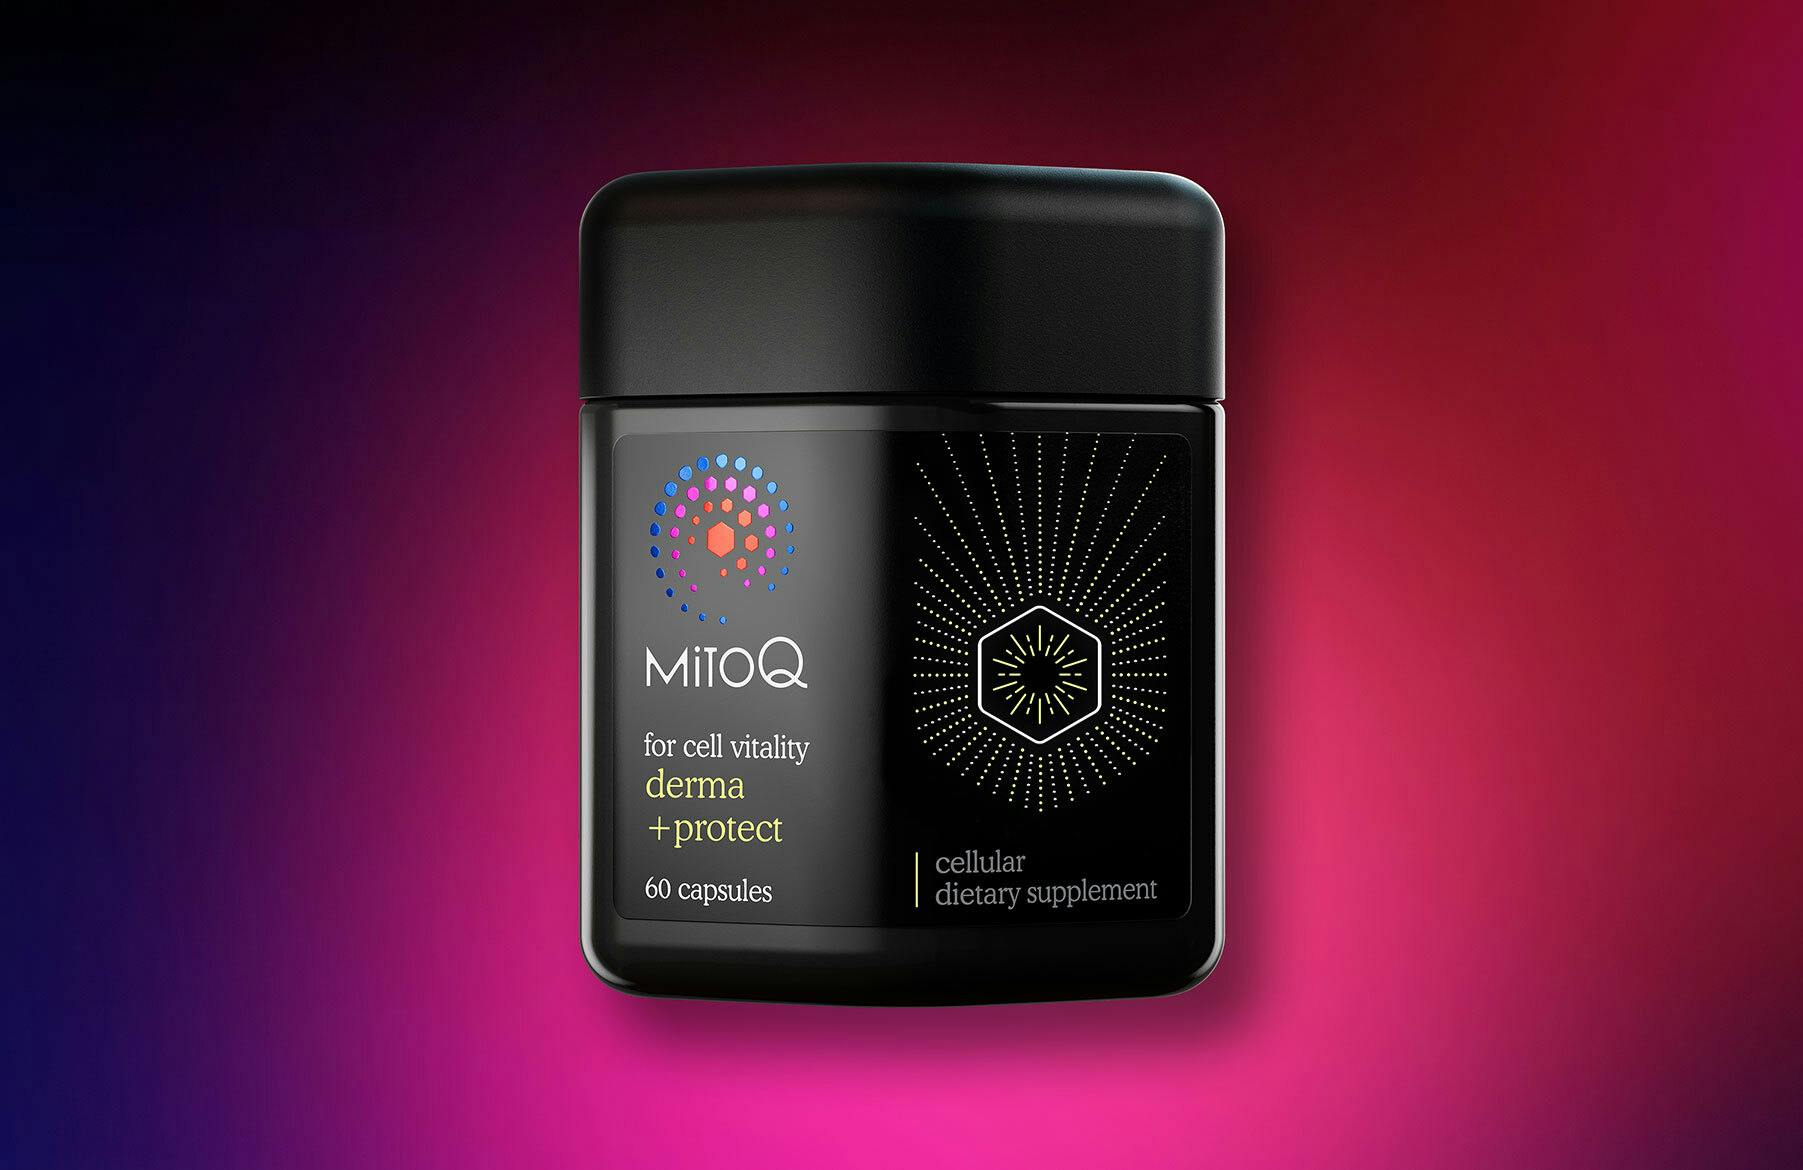 MitoQ derma + protect product image on dark gradient background